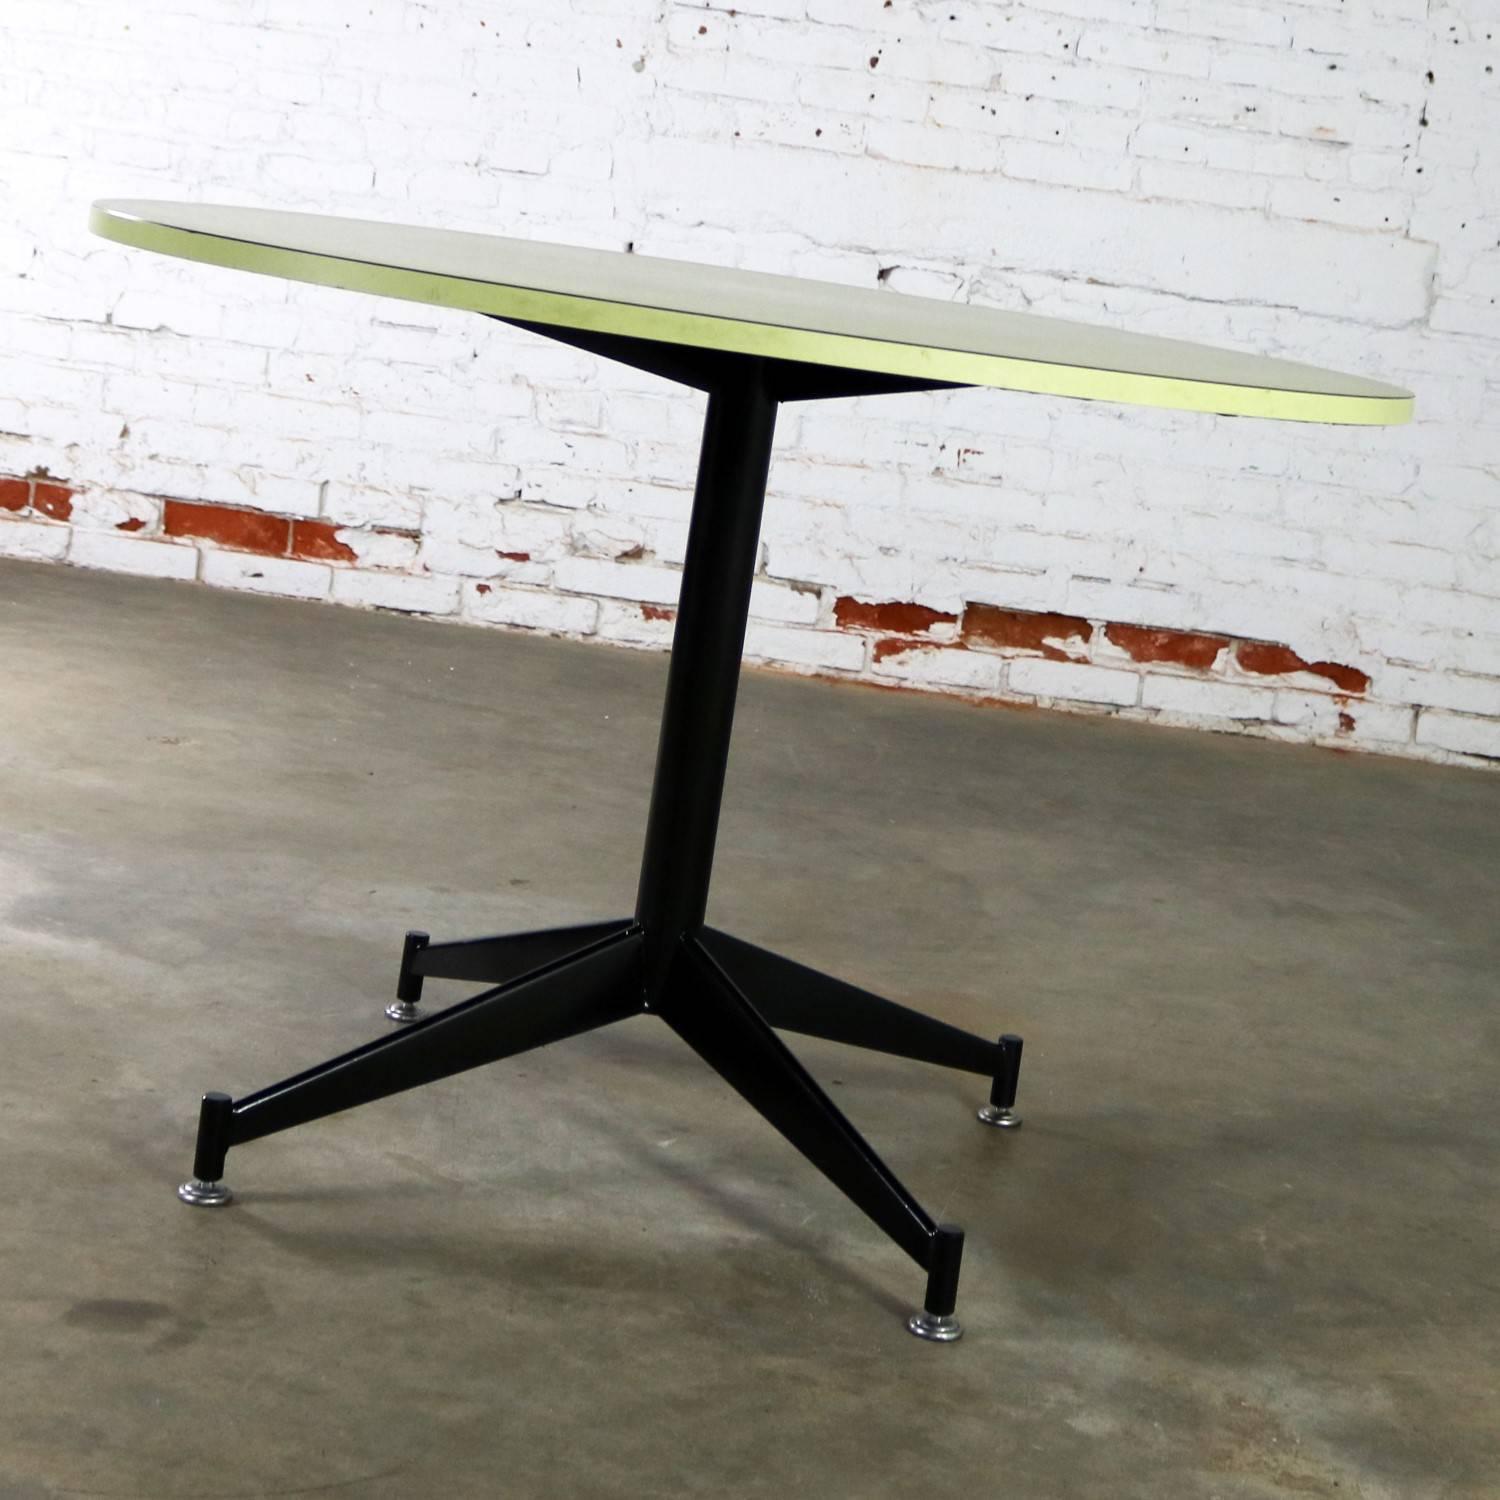 Handsome vintage MCM round dining table with avocado green laminate top and black painted steel central pedestal base. This table is unmarked, and the manufacturer is yet unknown, but it is done in the style of Paul McCobb for Directional. It is in